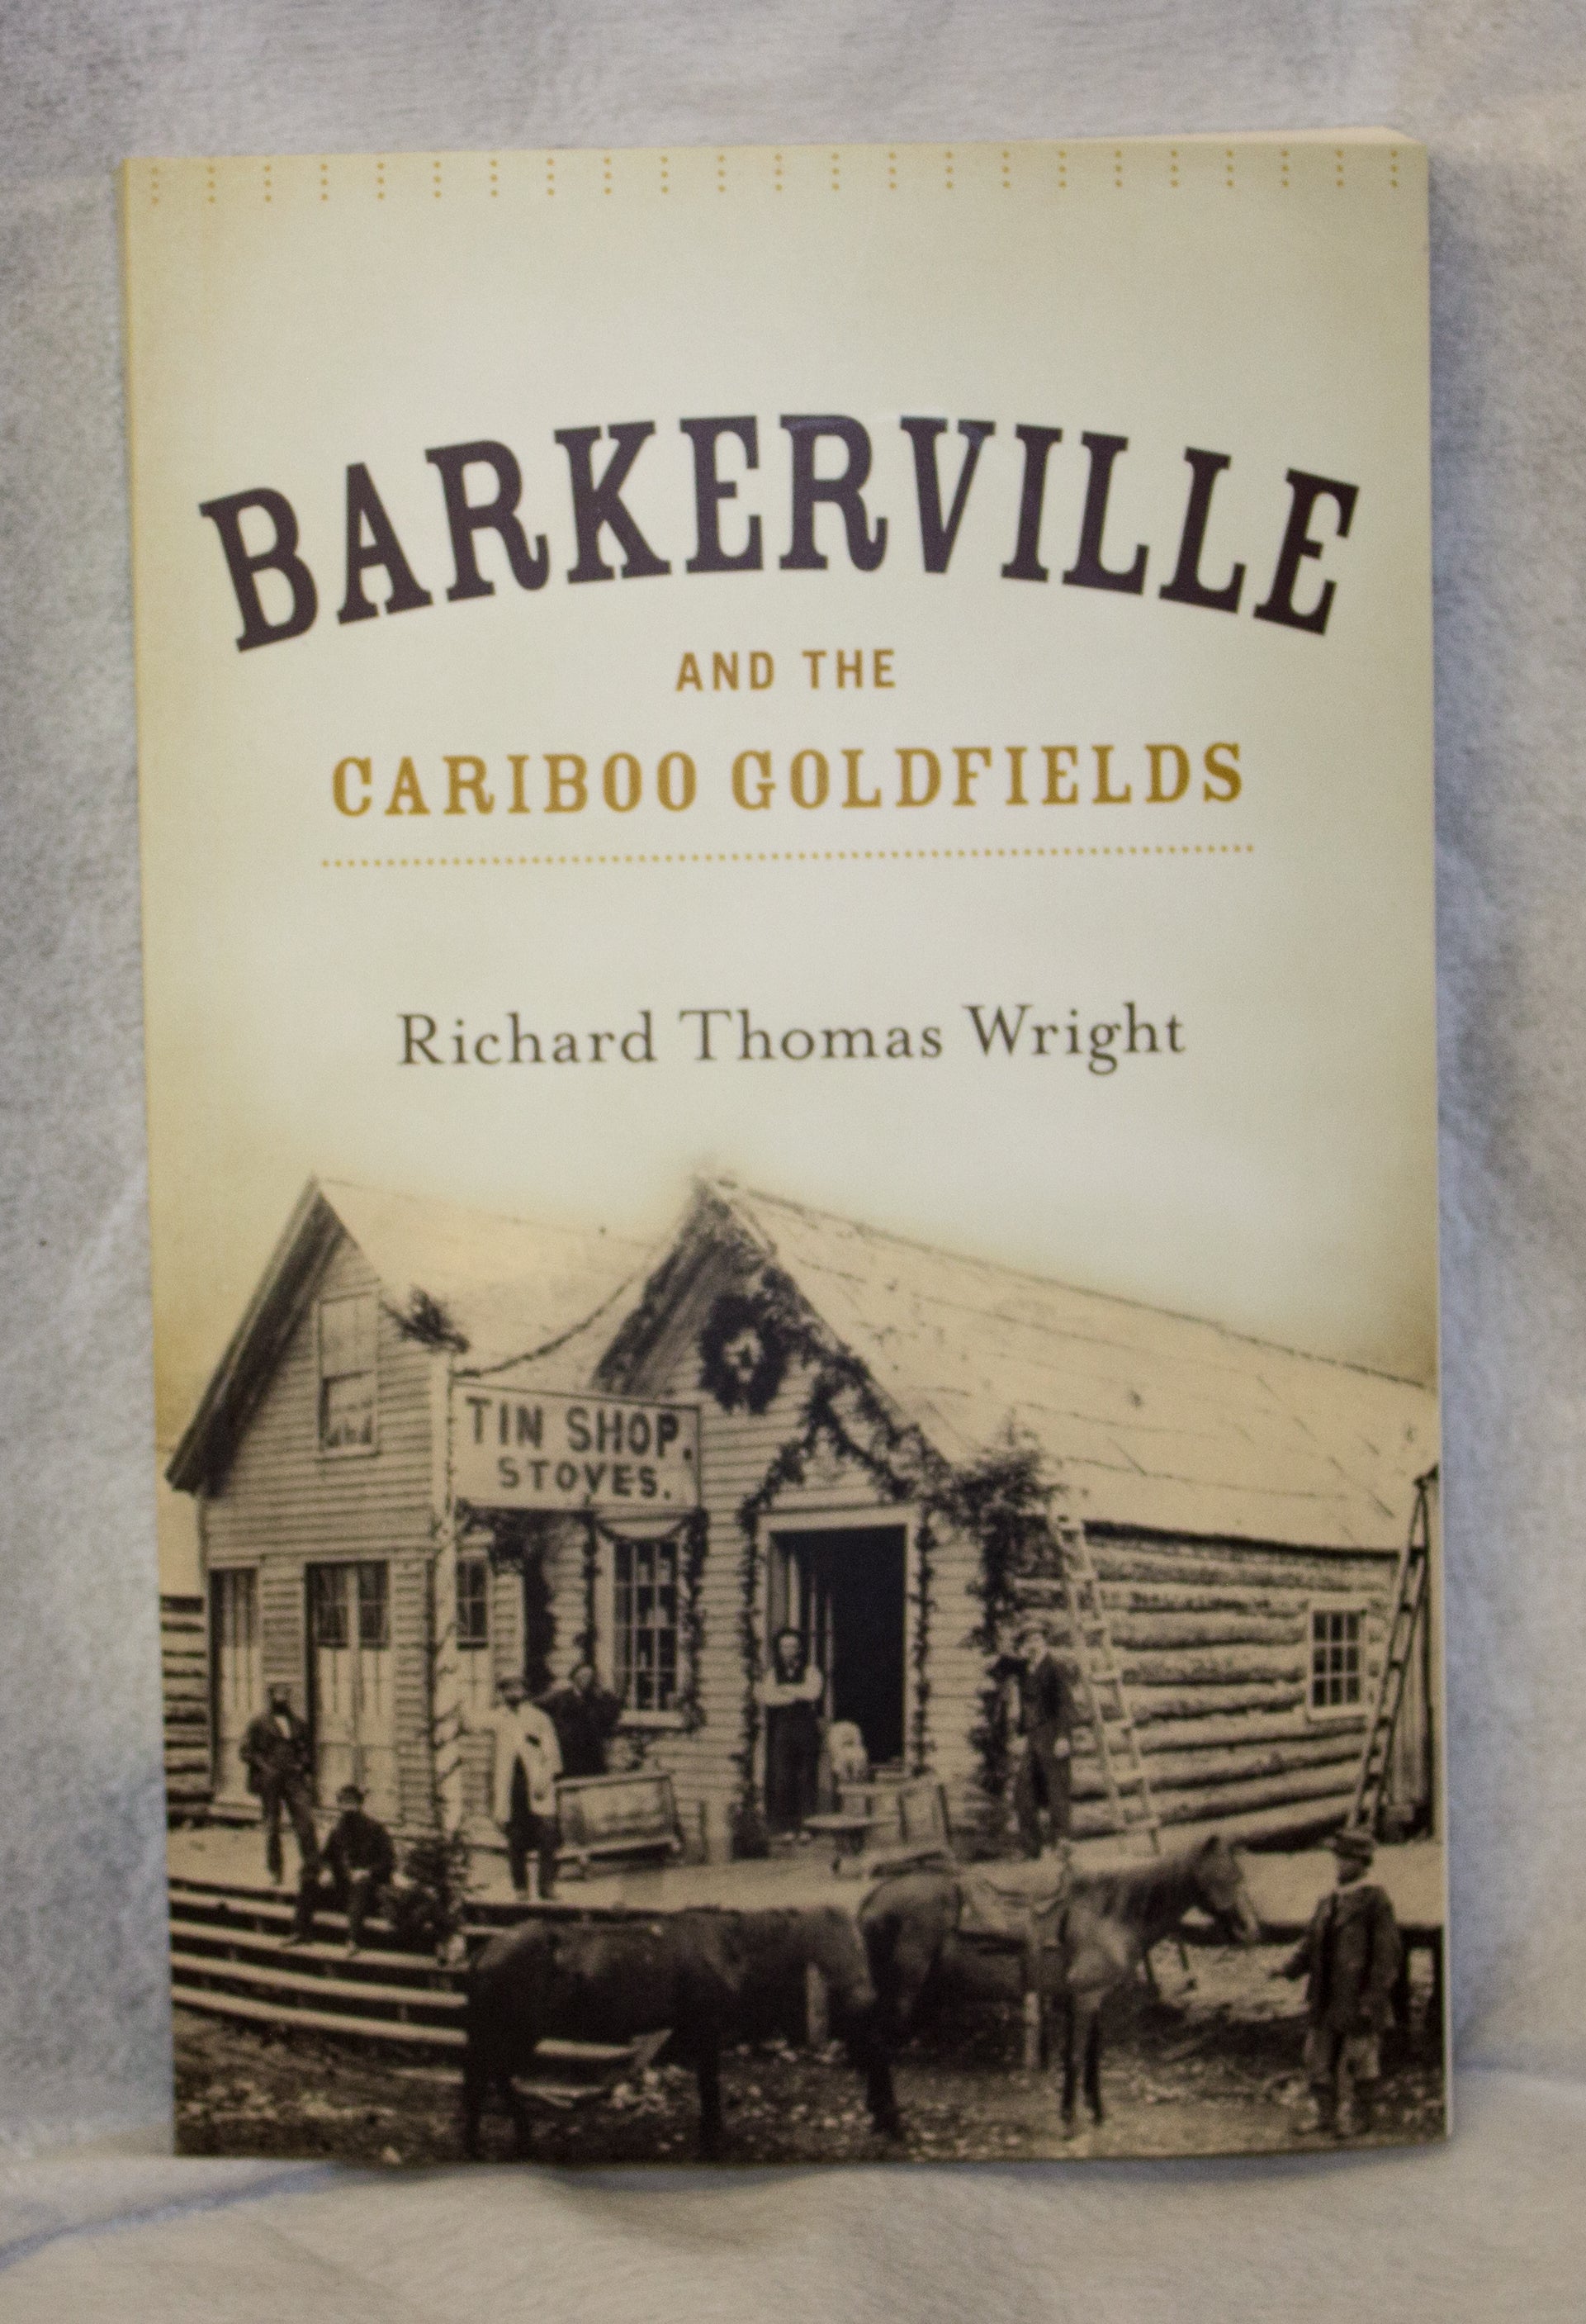 Barkerville and the Cariboo Gold Fields